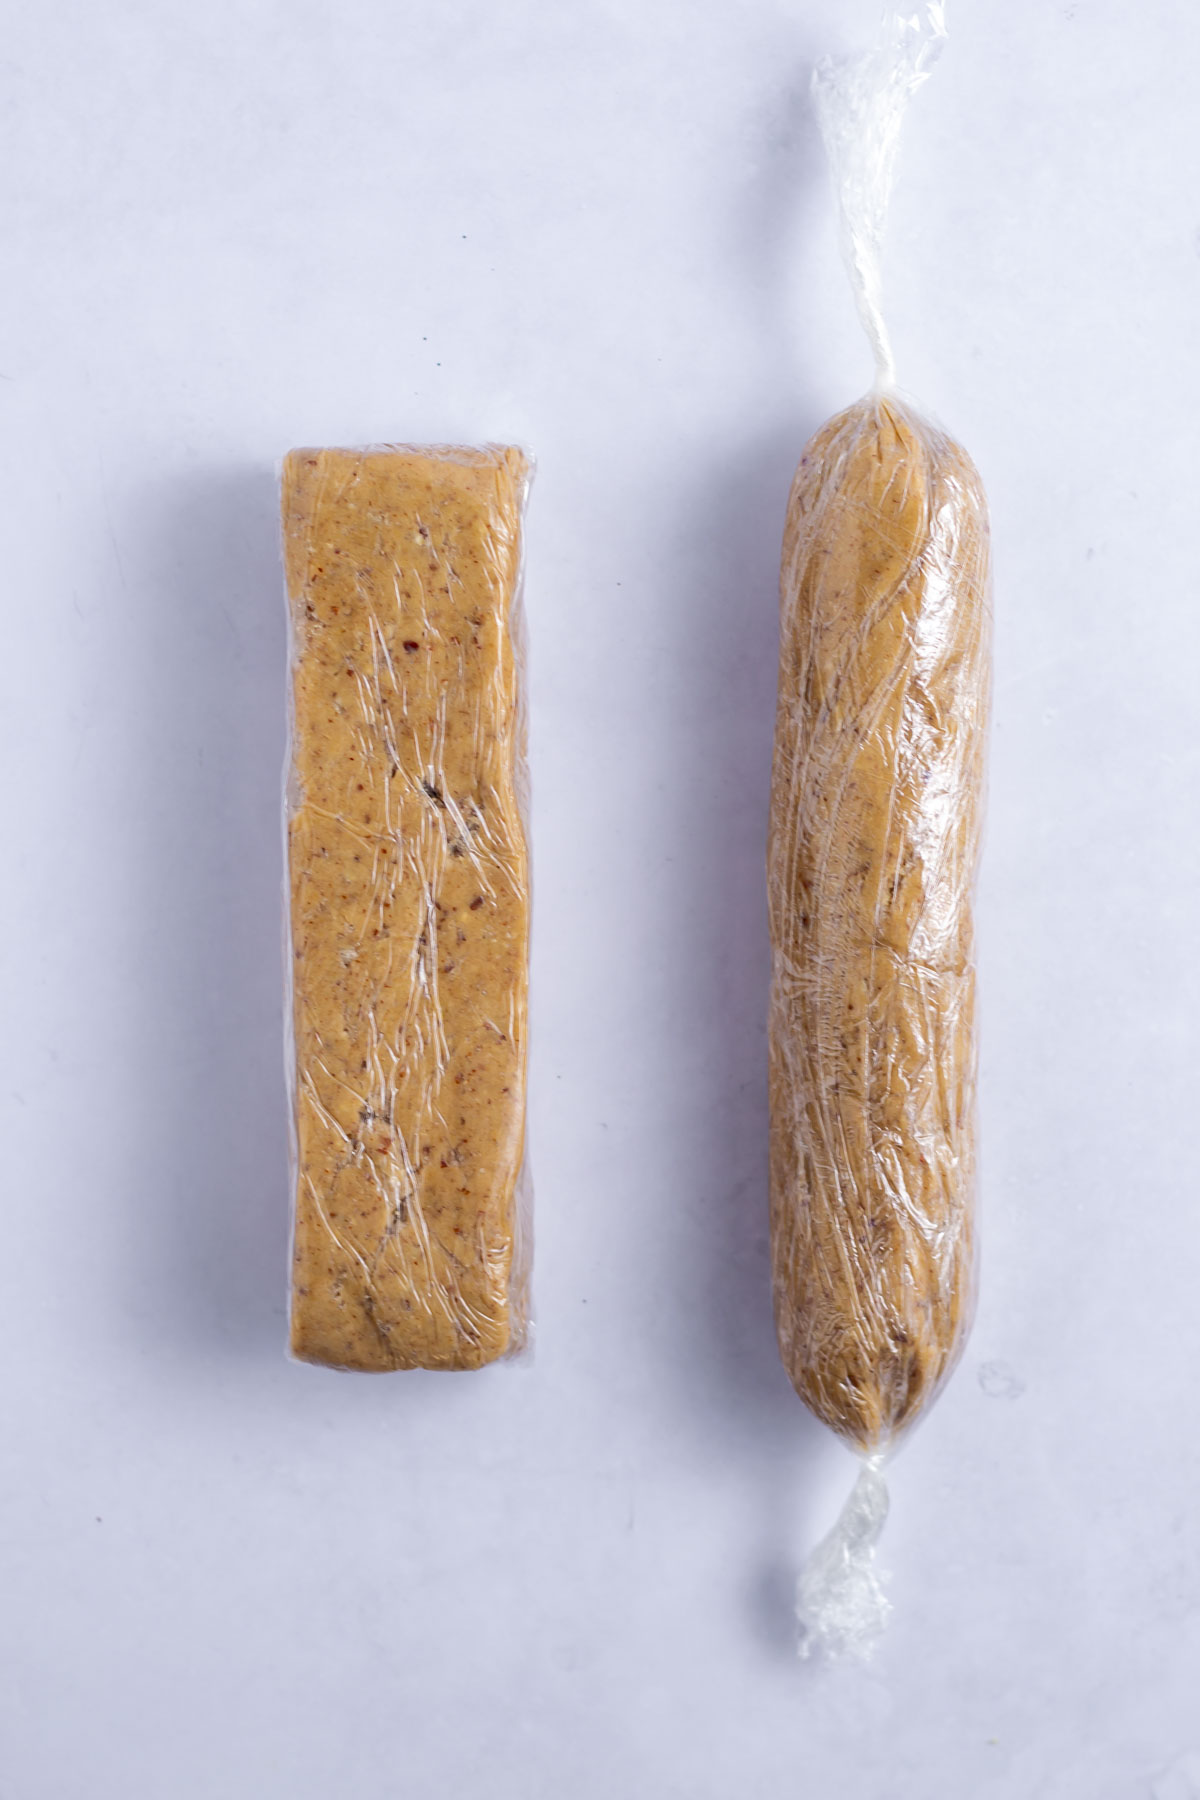 rectangular and circular log of dough wrapped in plastic